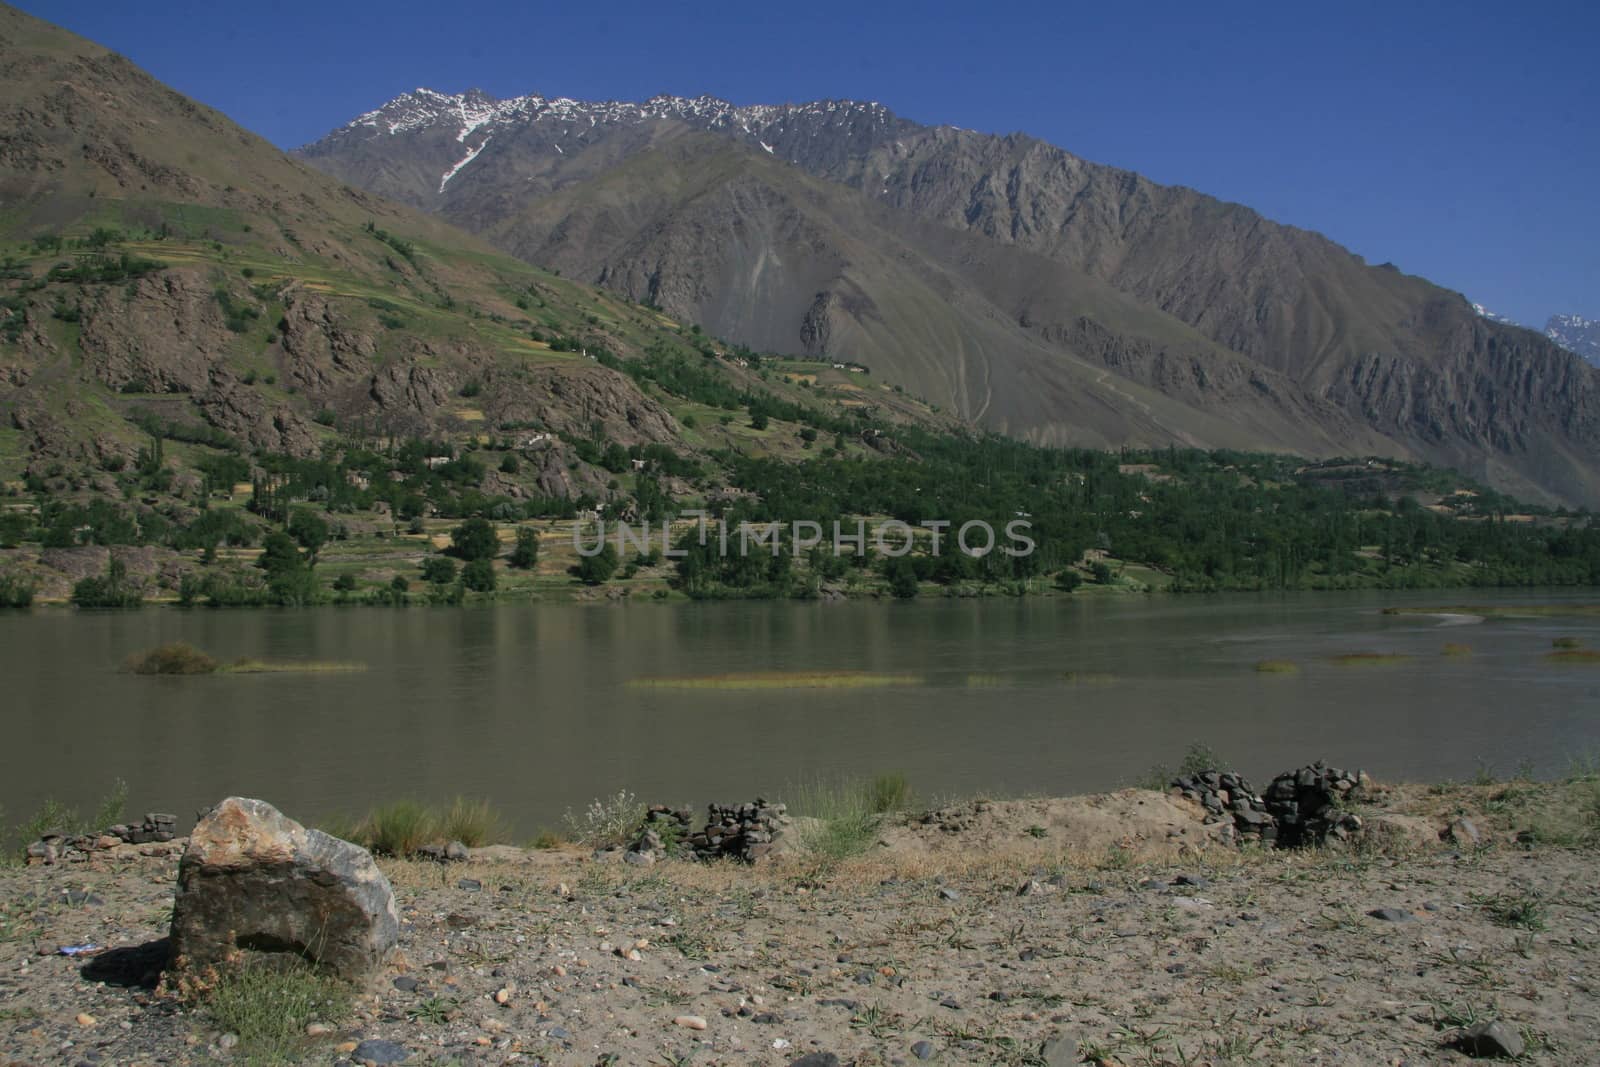 Pamir Russia Central Asia mountain landscapes by desant7474